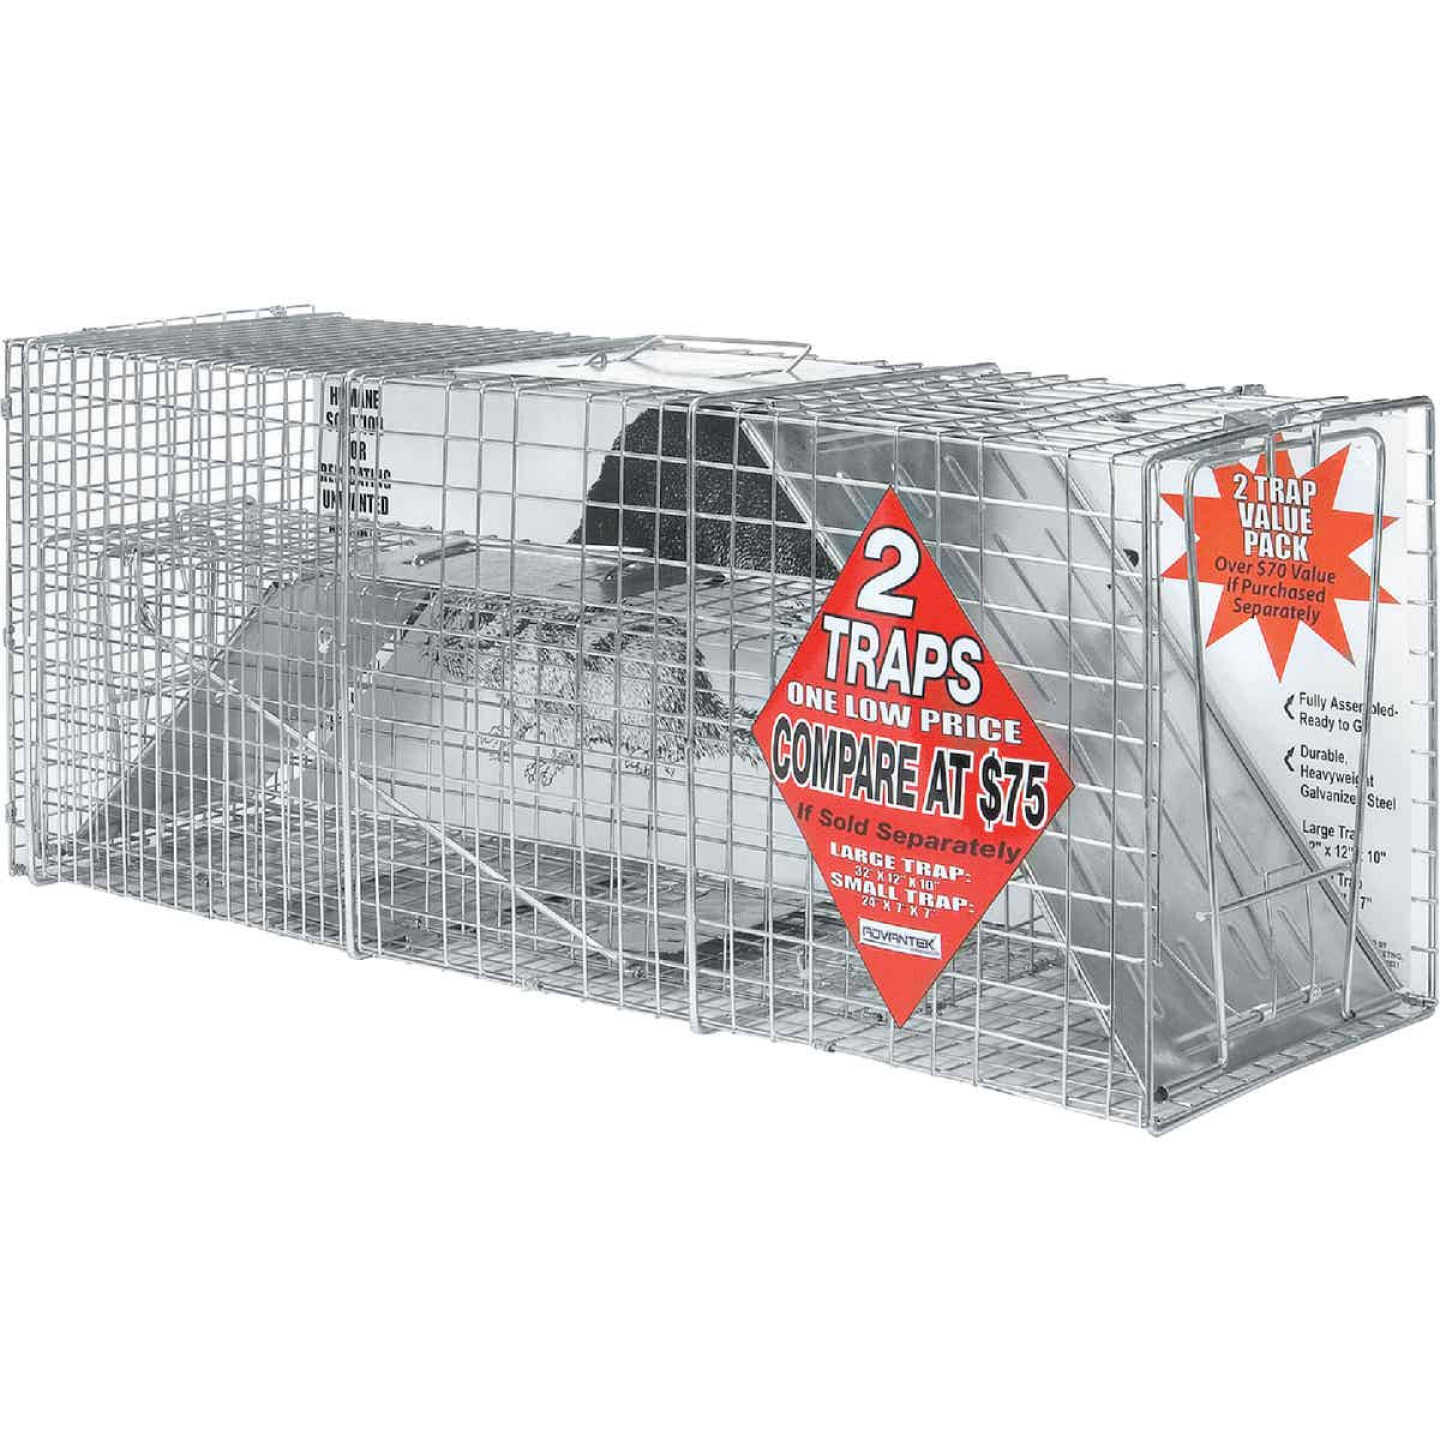 Live Animal Trap - What's The Best Choice?